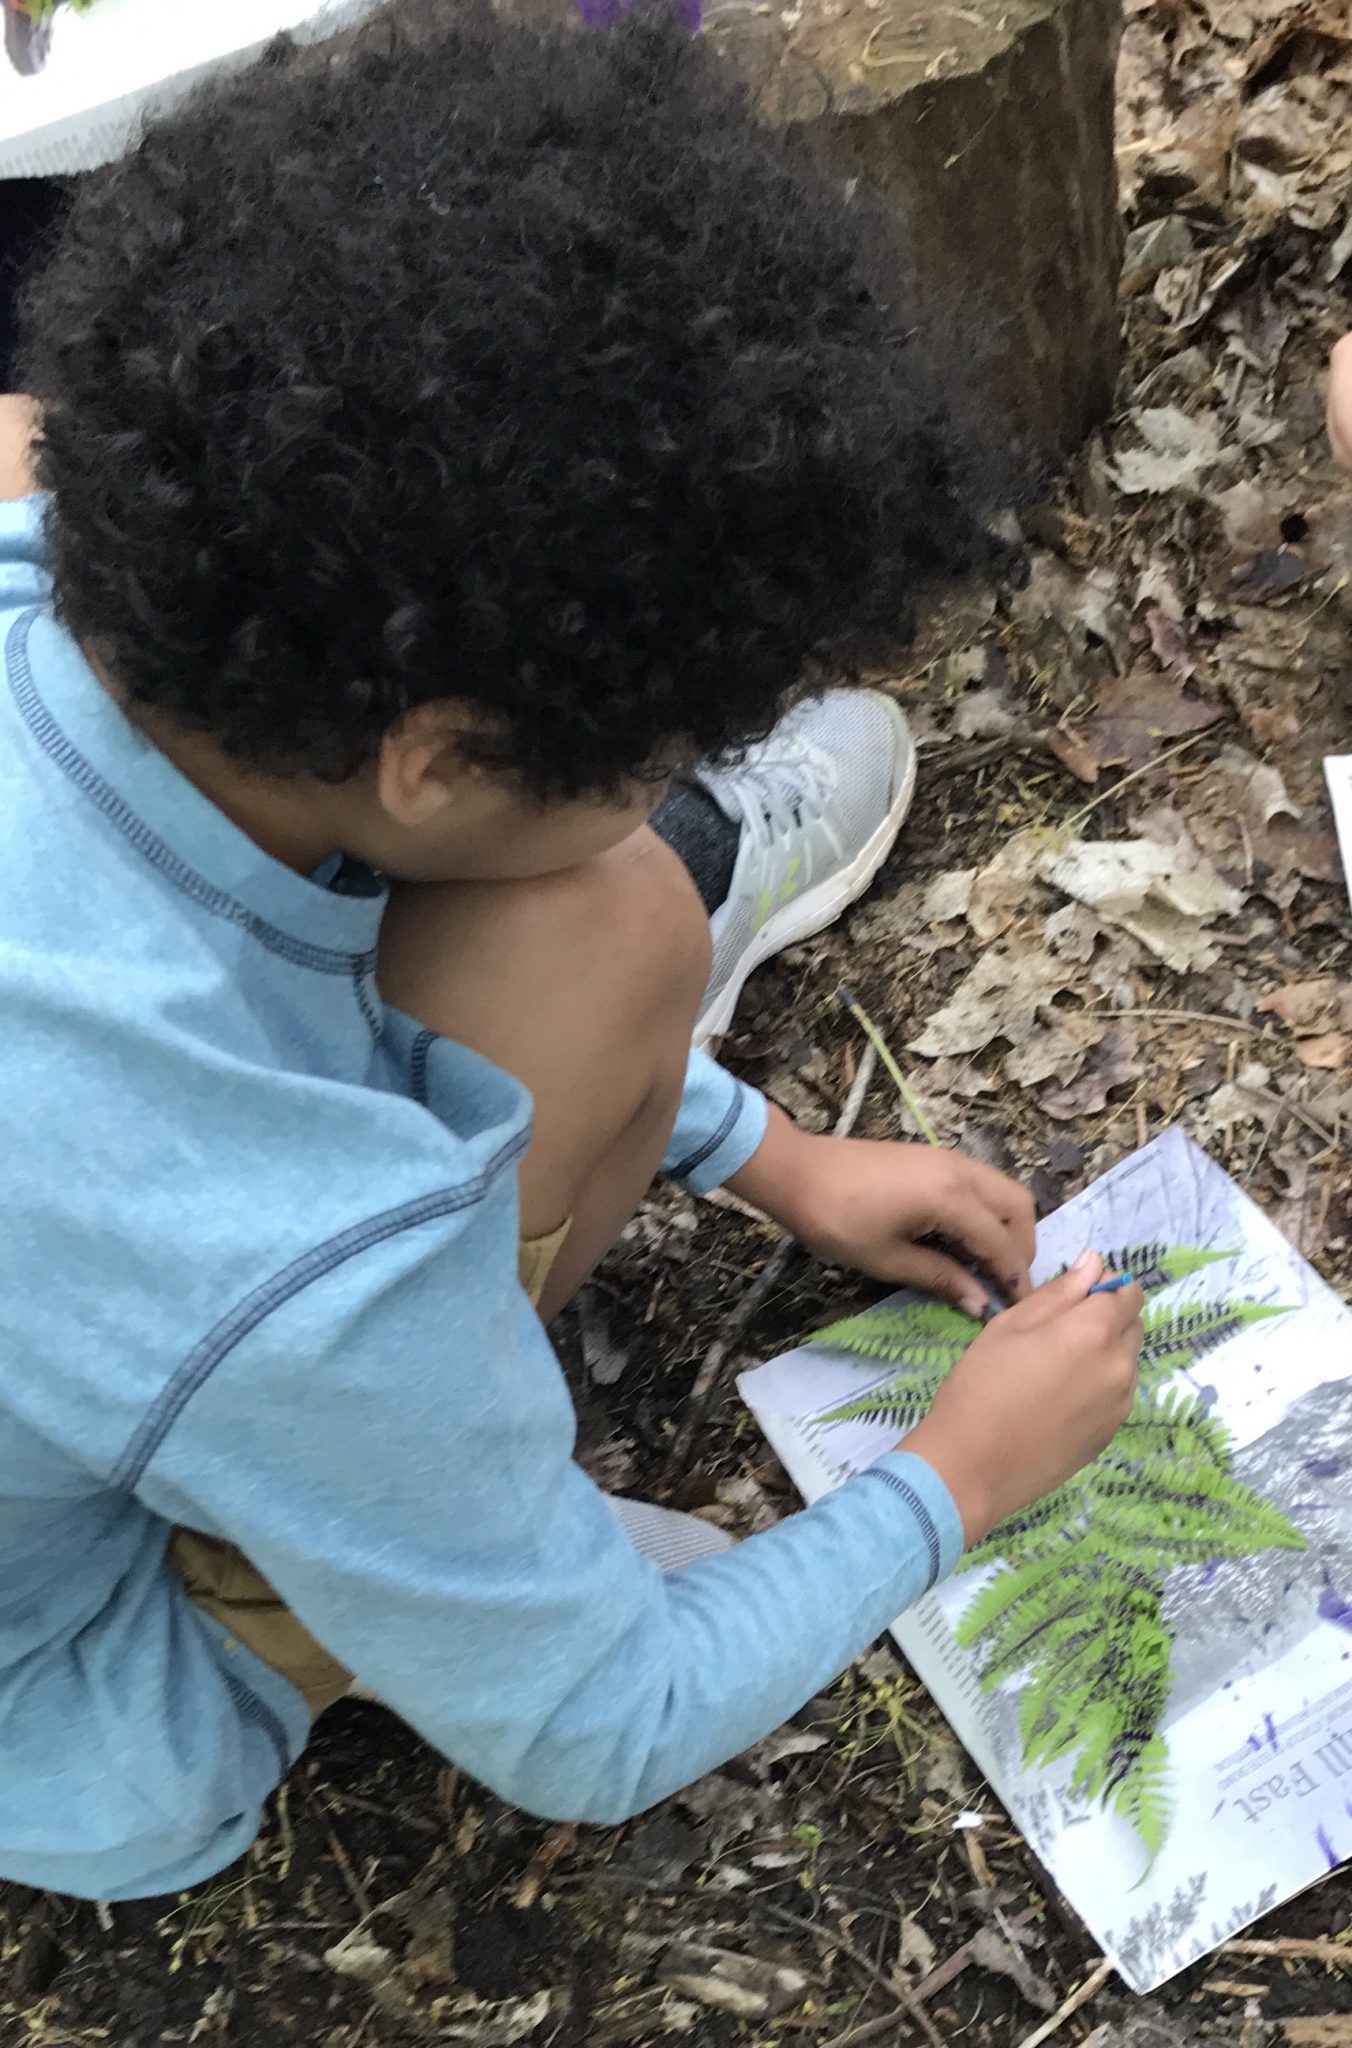 child (seen from back) doing leaf rubbing of fern